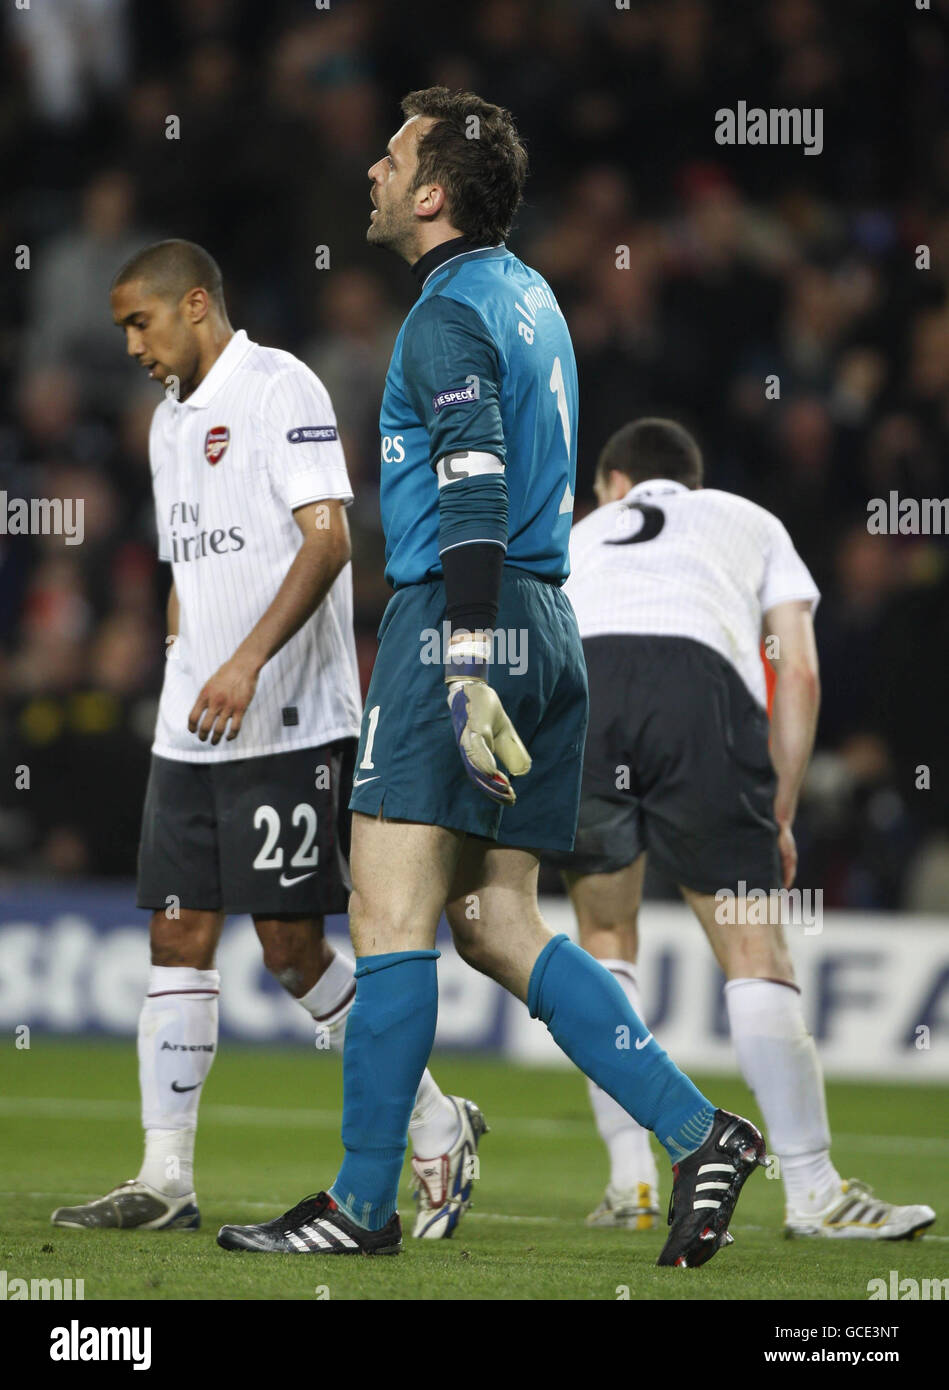 Arsenal's Manuel Almunia, Gael Clichy and Thomas Vermaelen show their dejection after Barcelona's Lionel Messi scores his third goal of the game during a Quarter Final Second Leg at the Nou Camp, Barcelona. Stock Photo